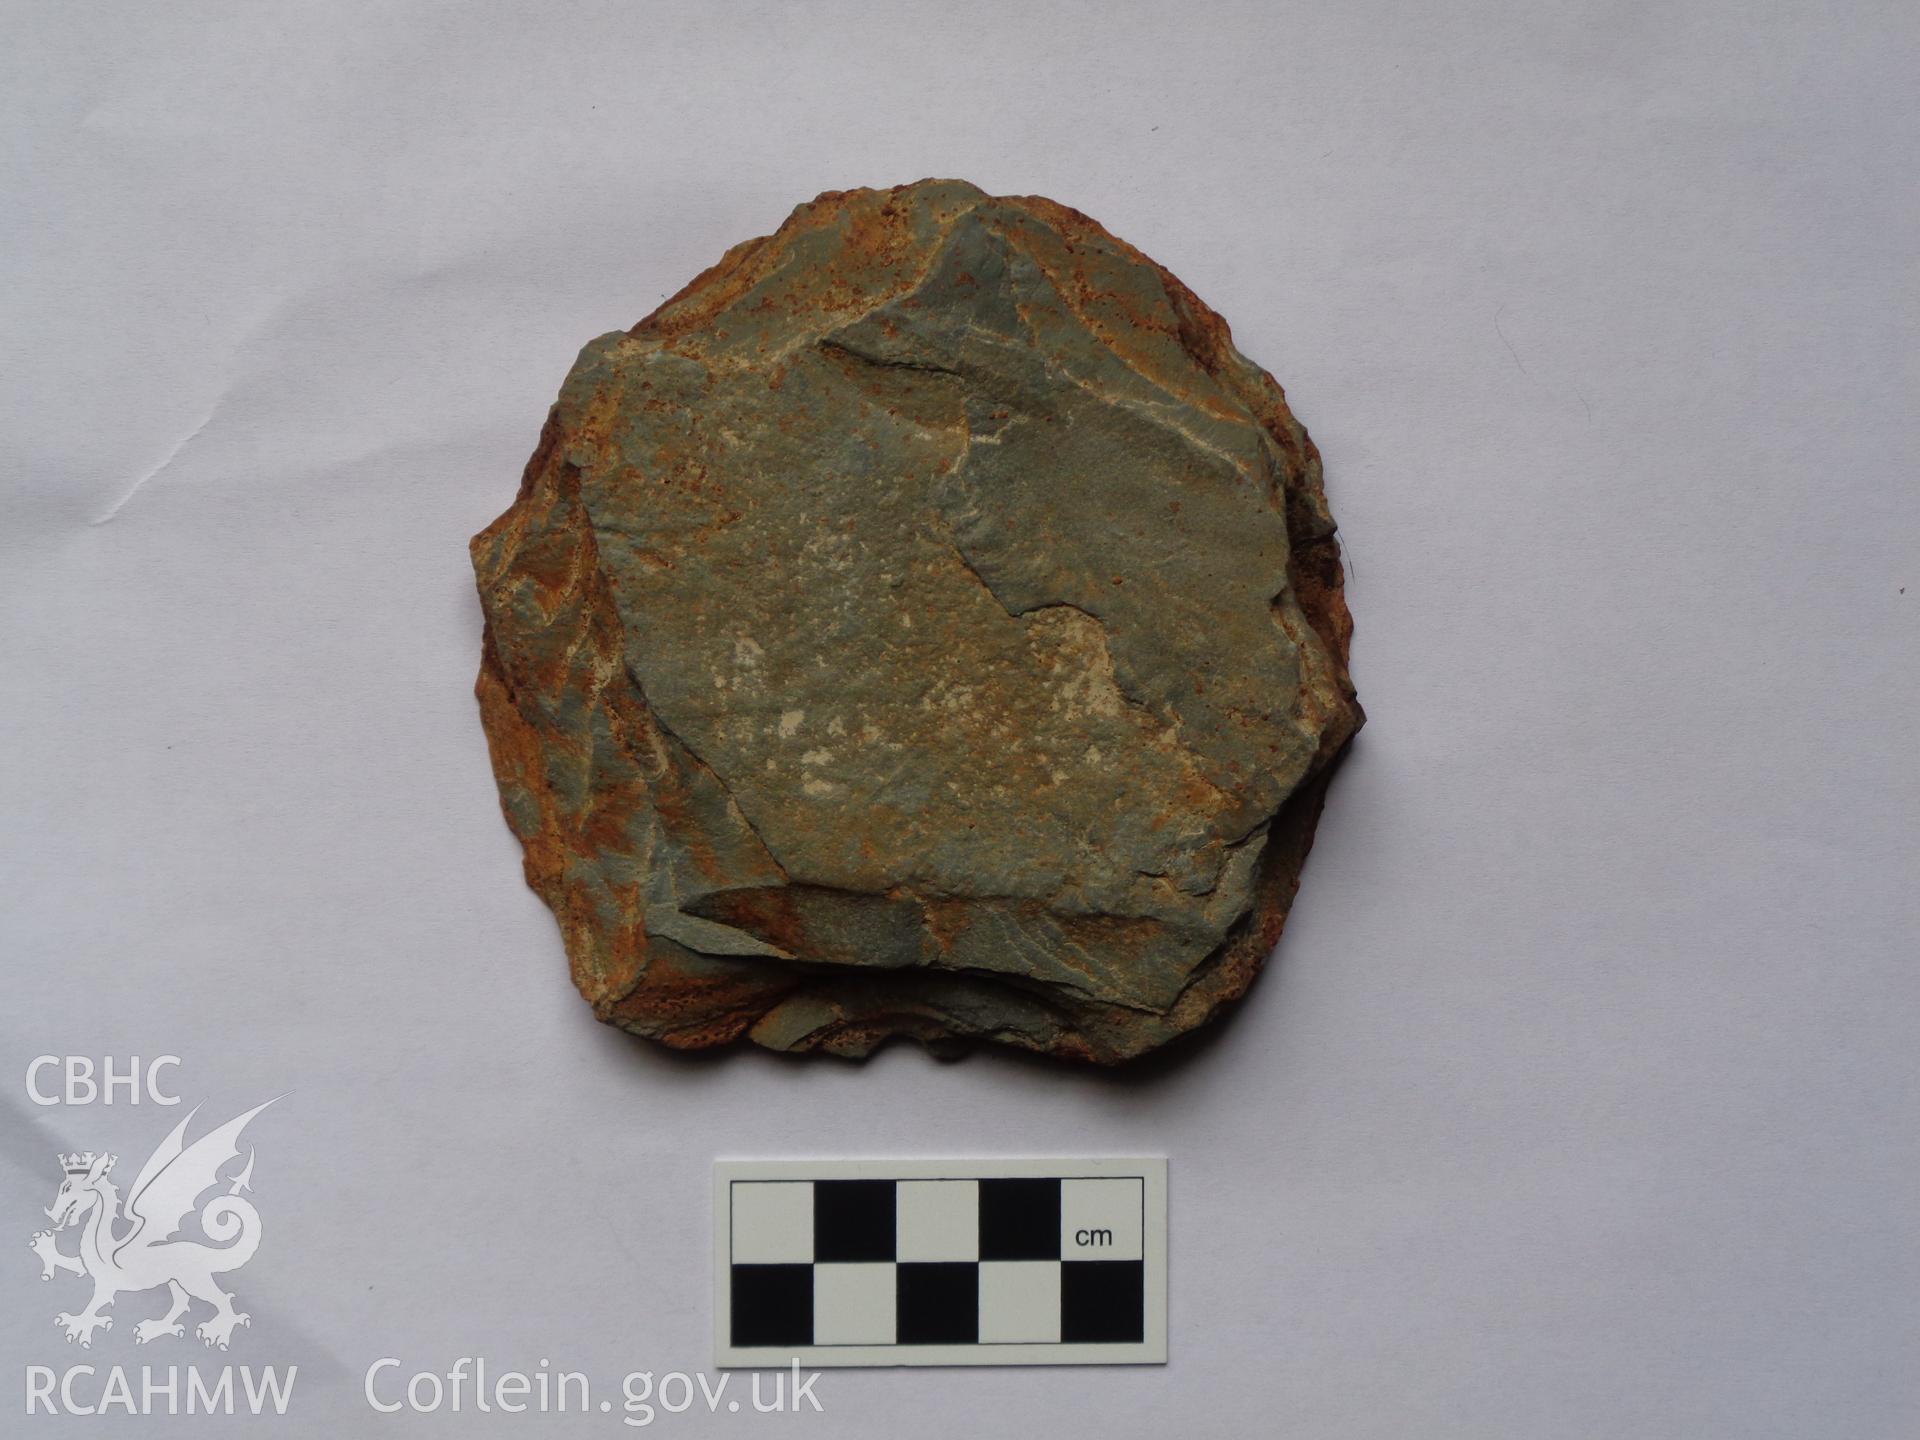 Photographic record of pot lid (side A) found during archaeological work at Gogerddan Campus, Aberystwyth carried out by Archaeology Wales, 2016-2017. Project No 2460.